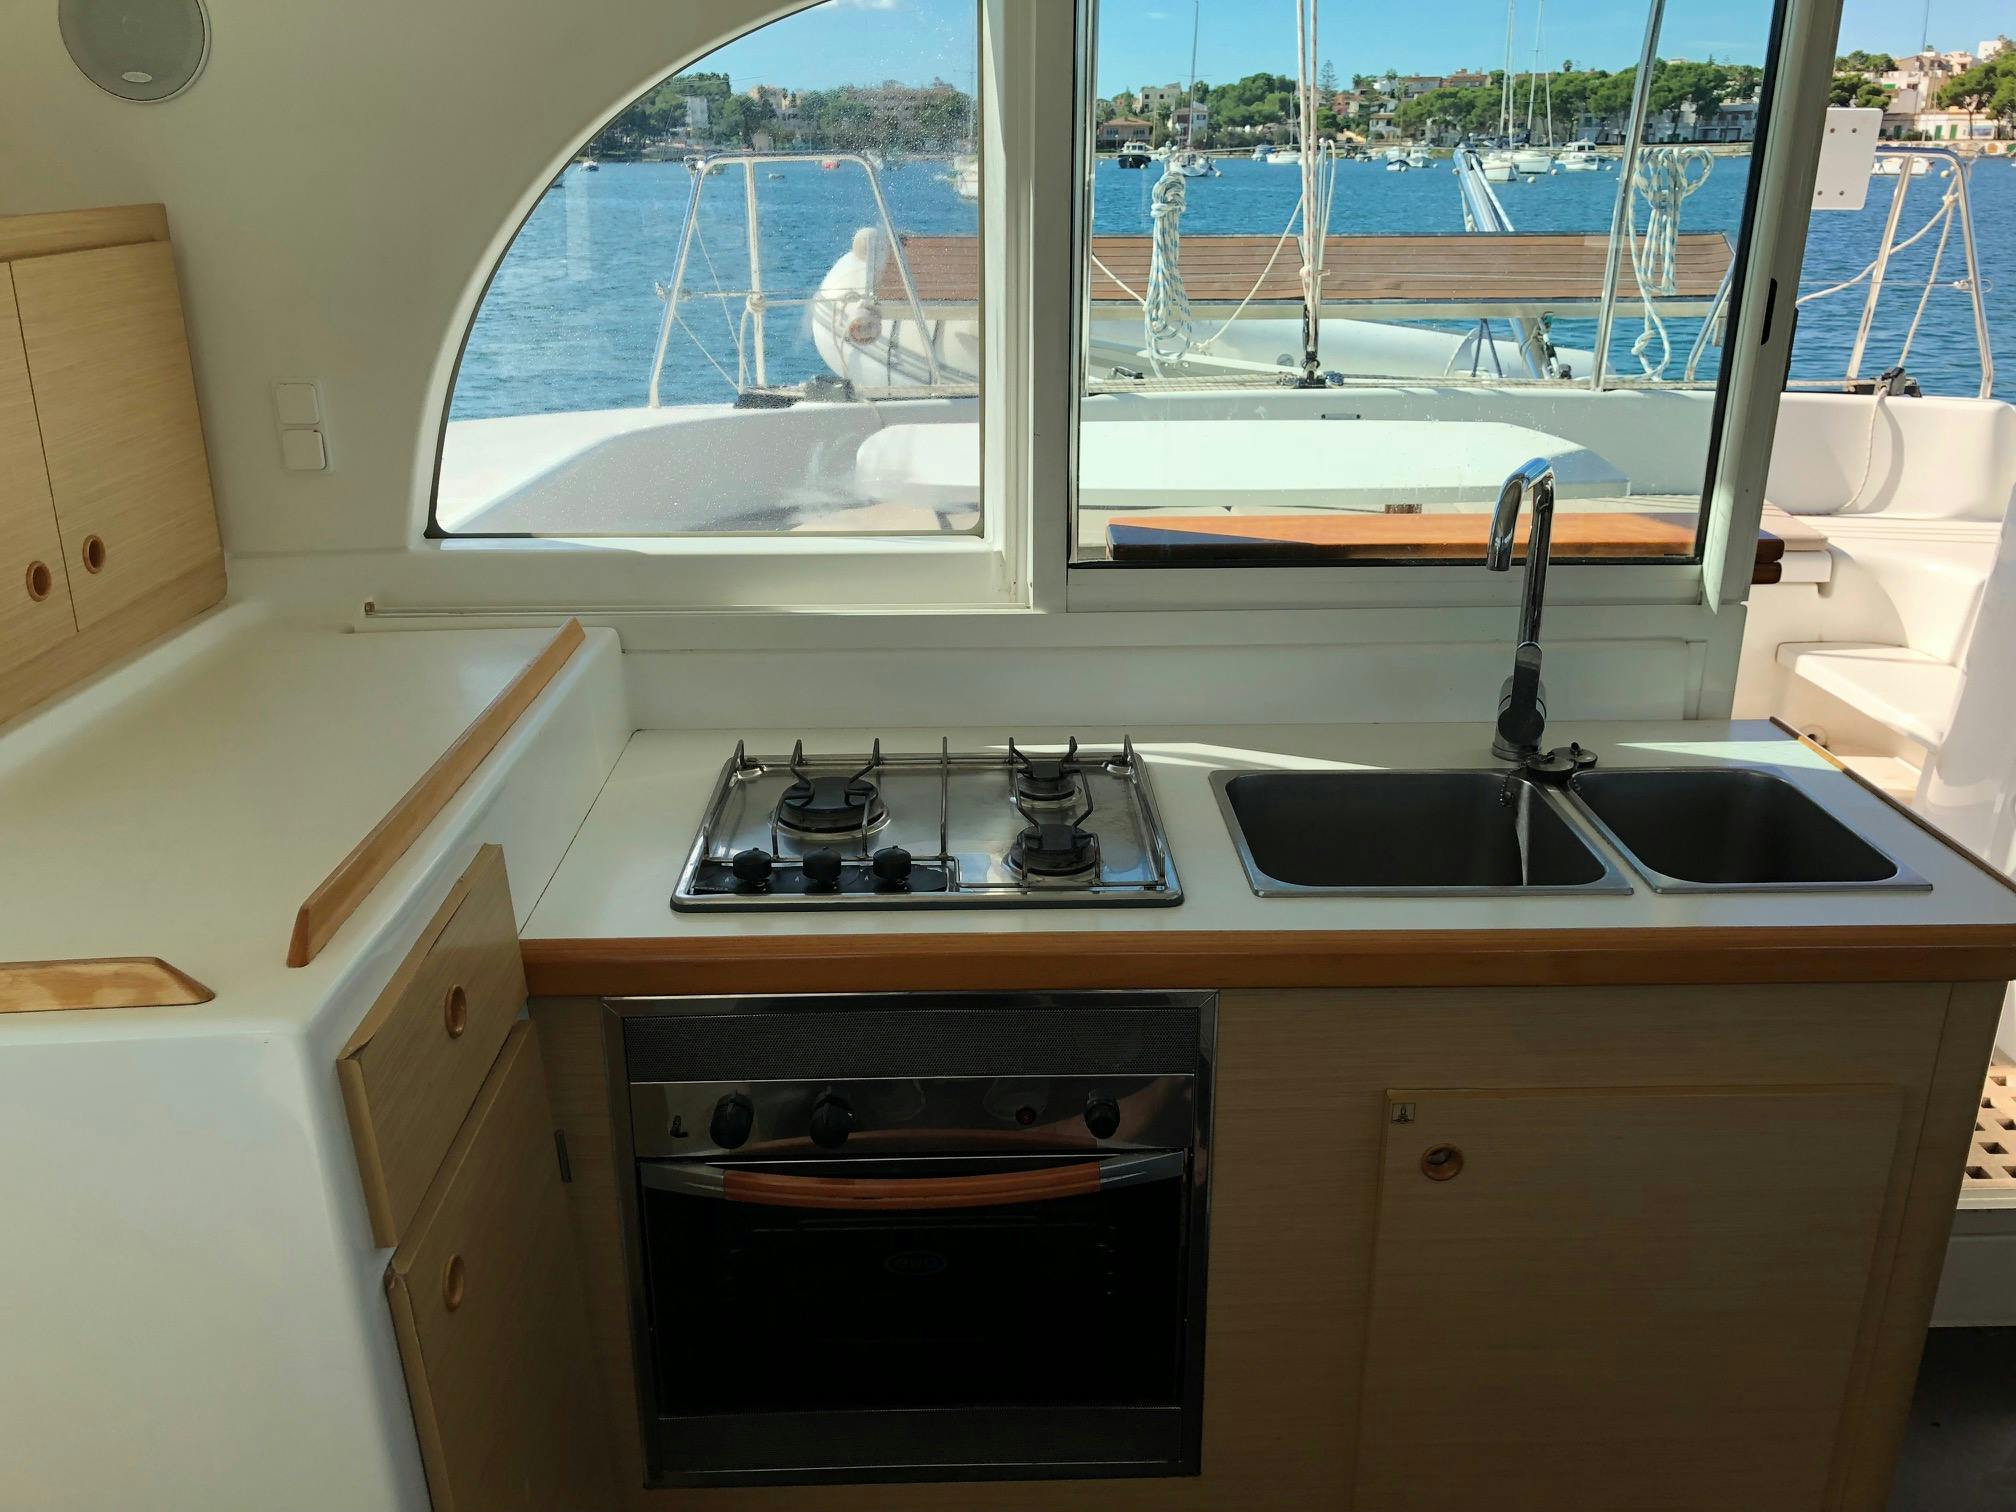 Book Lagoon 380 S2 - 4 cab. Catamaran for bareboat charter in Tenerife, San Miguel Marina, Canary Islands, Spain with TripYacht!, picture 6